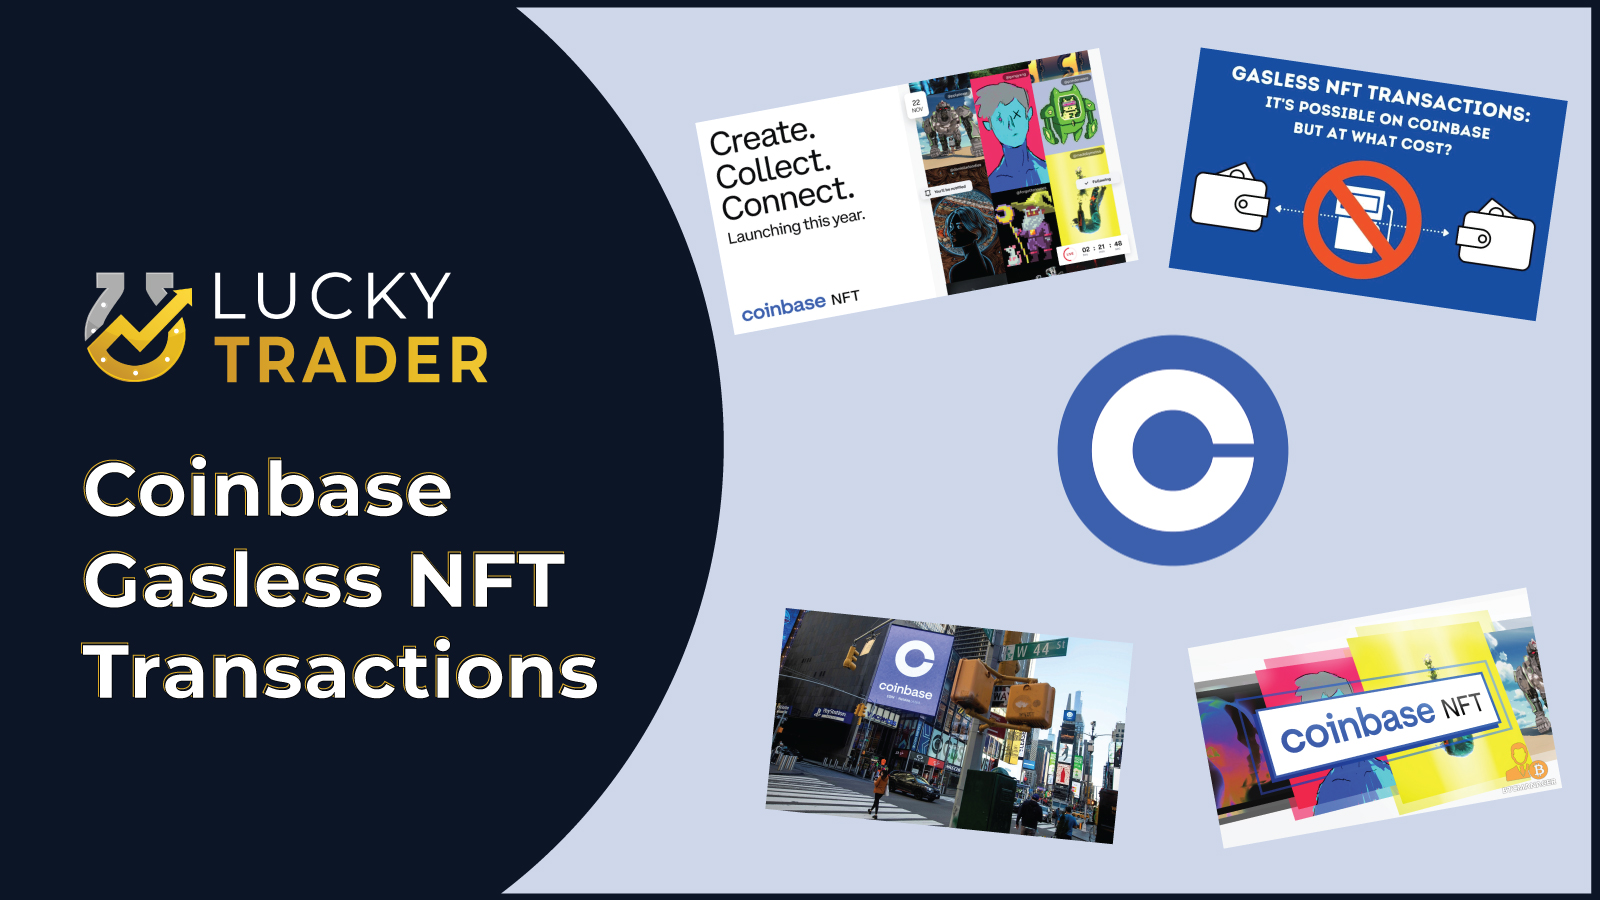 Gasless NFT Transactions: It’s Possible on CoinBase But at What Cost?